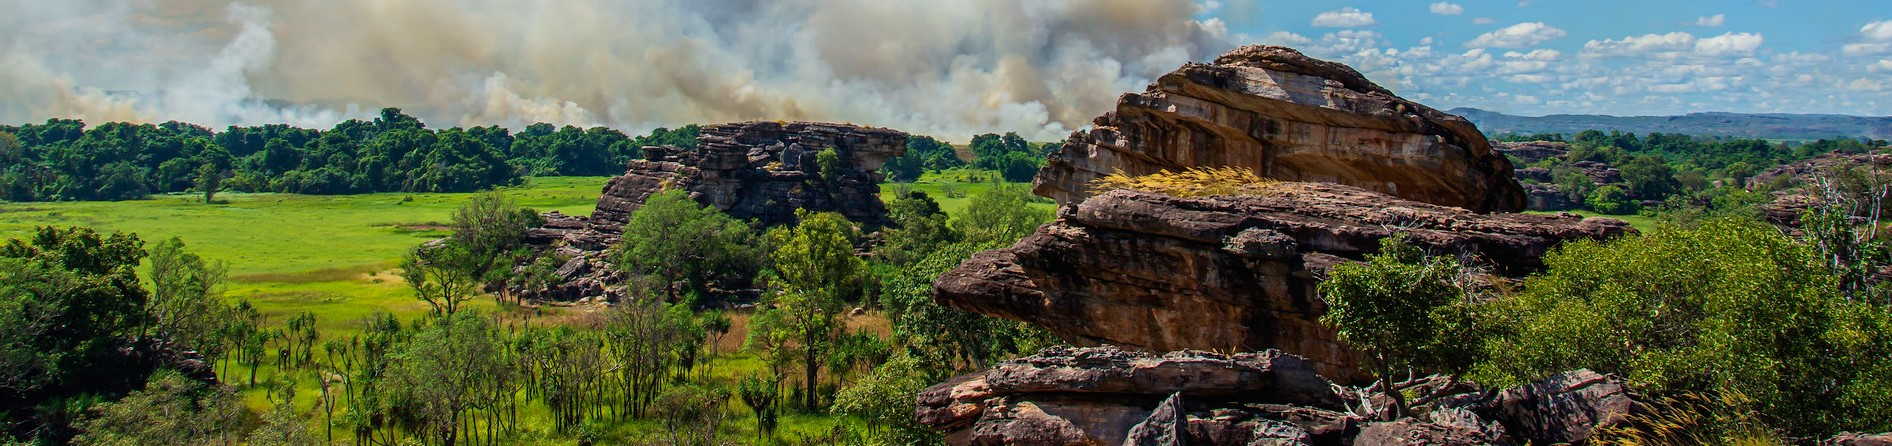 What is the meaning of Kakadu?